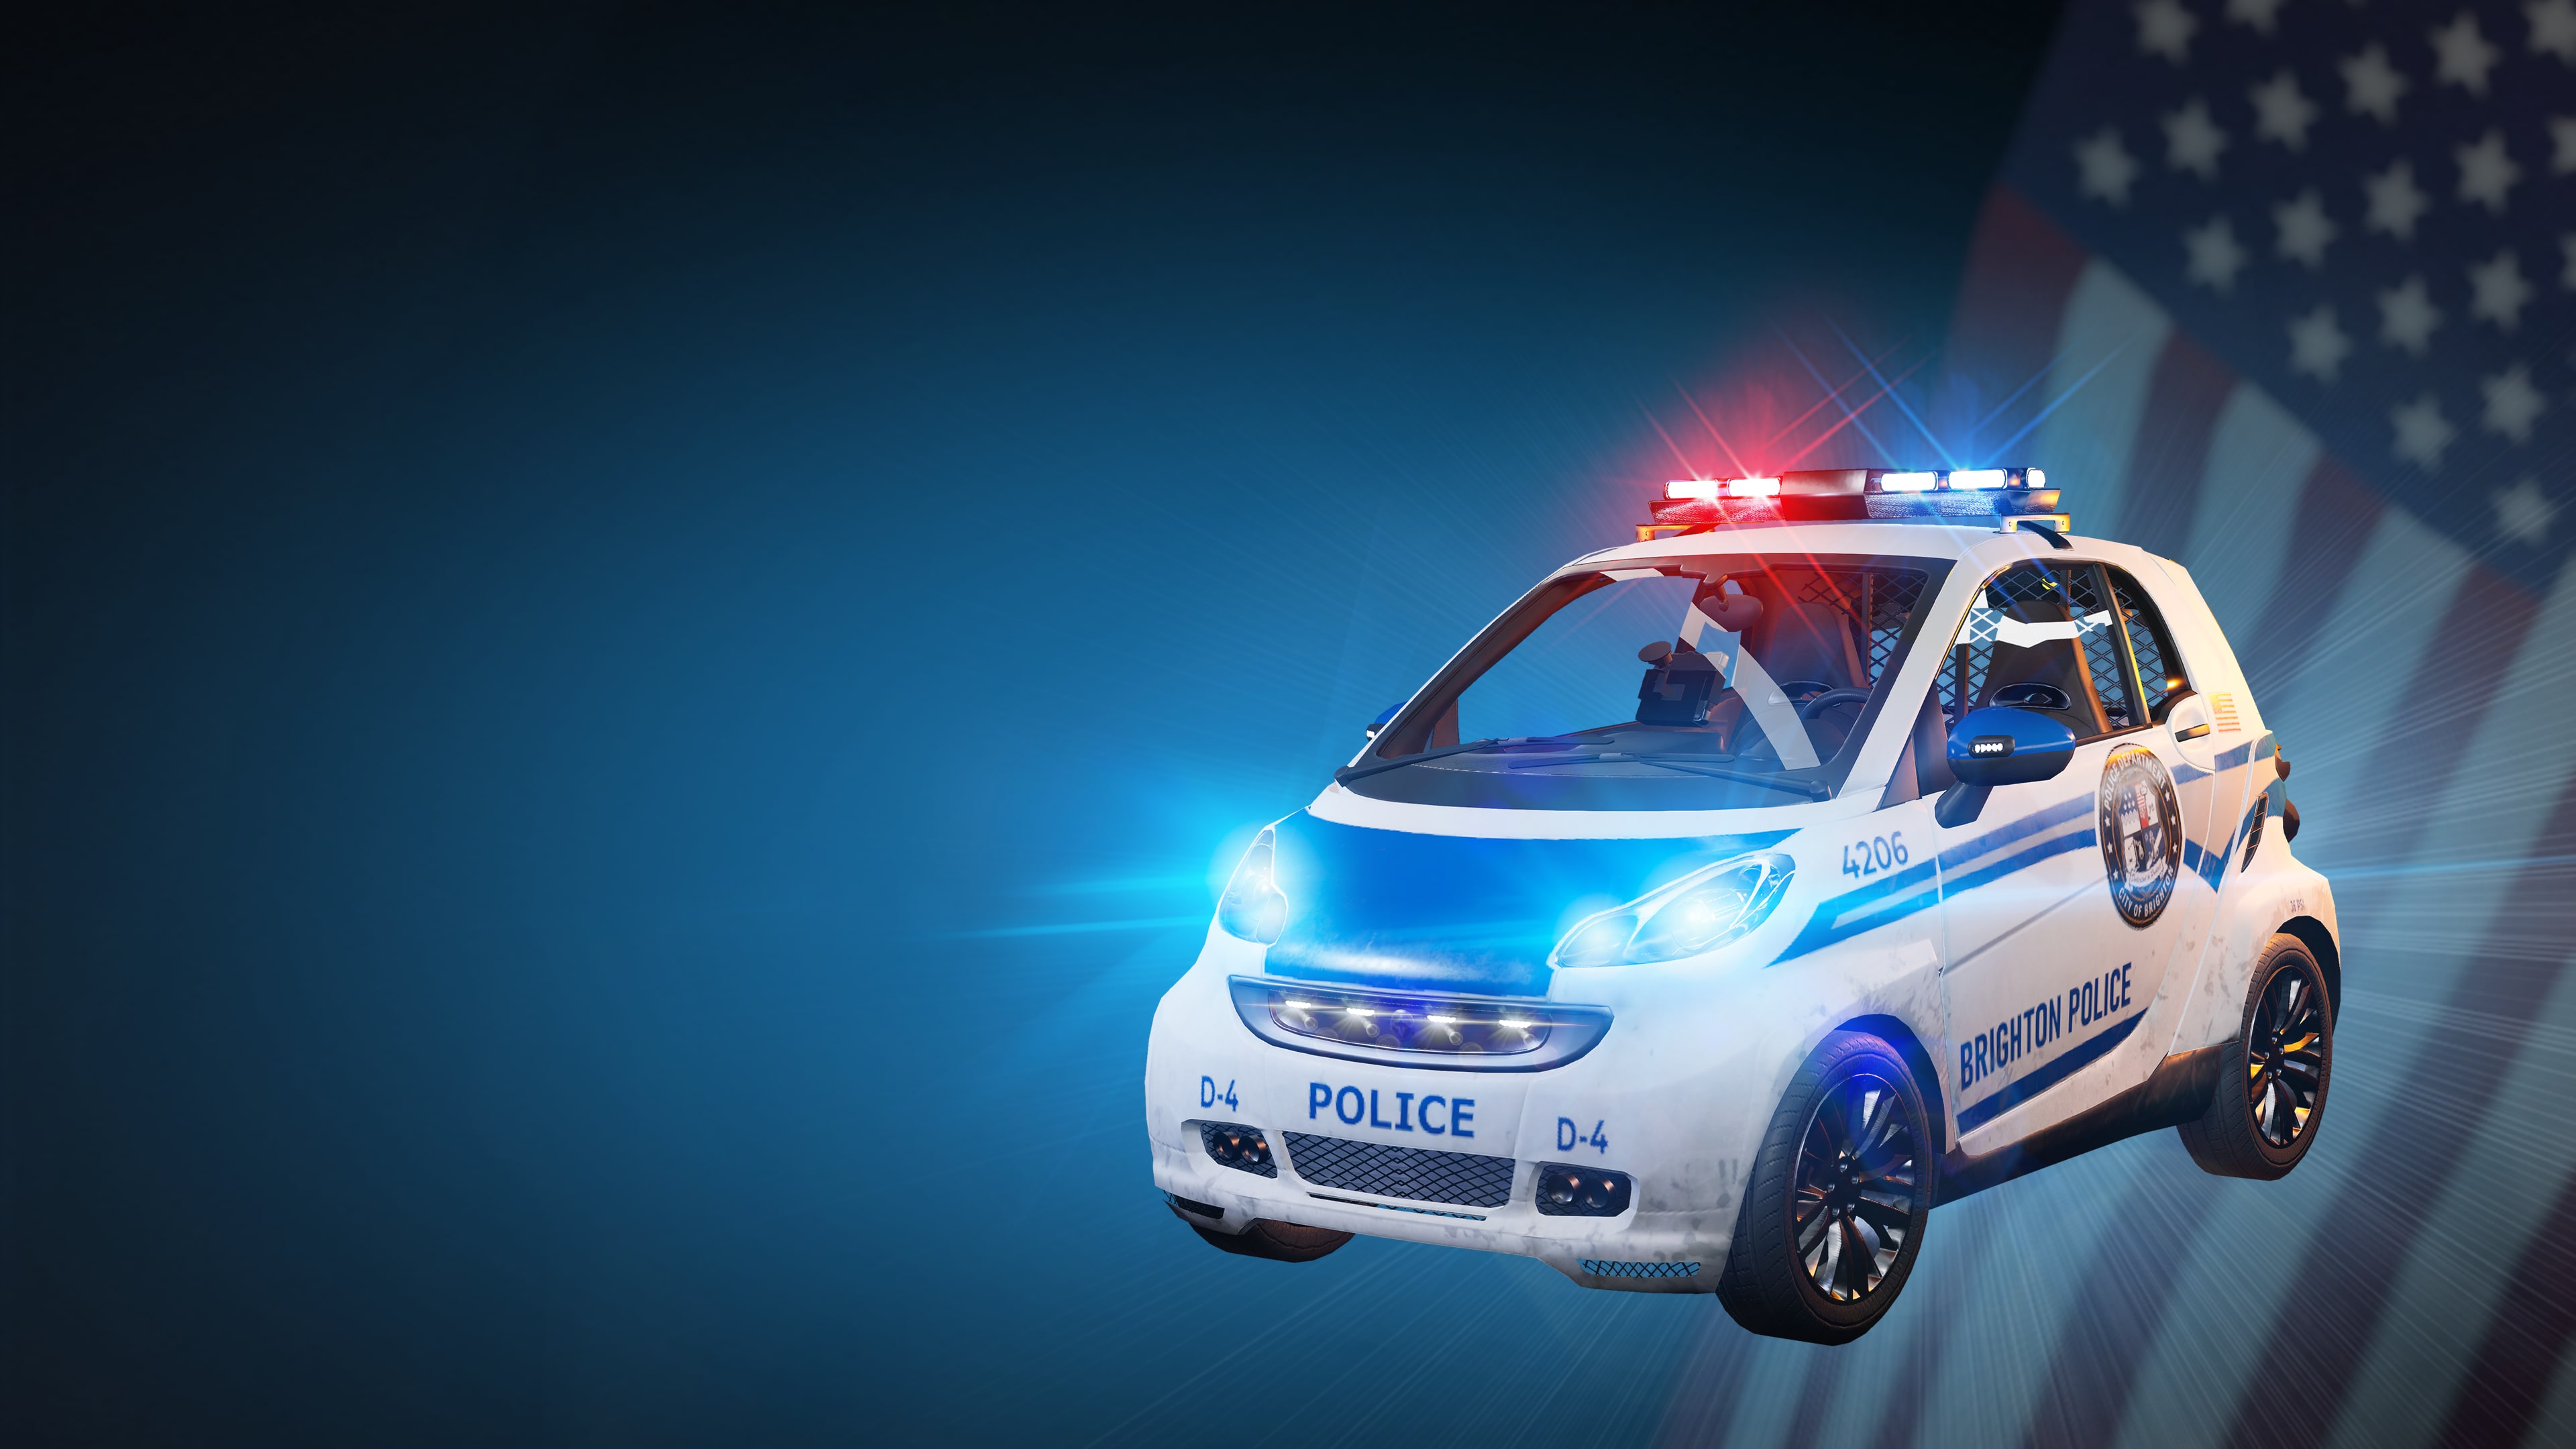 Simulator: DLC Police Vehicle Police Patrol : Officers Compact